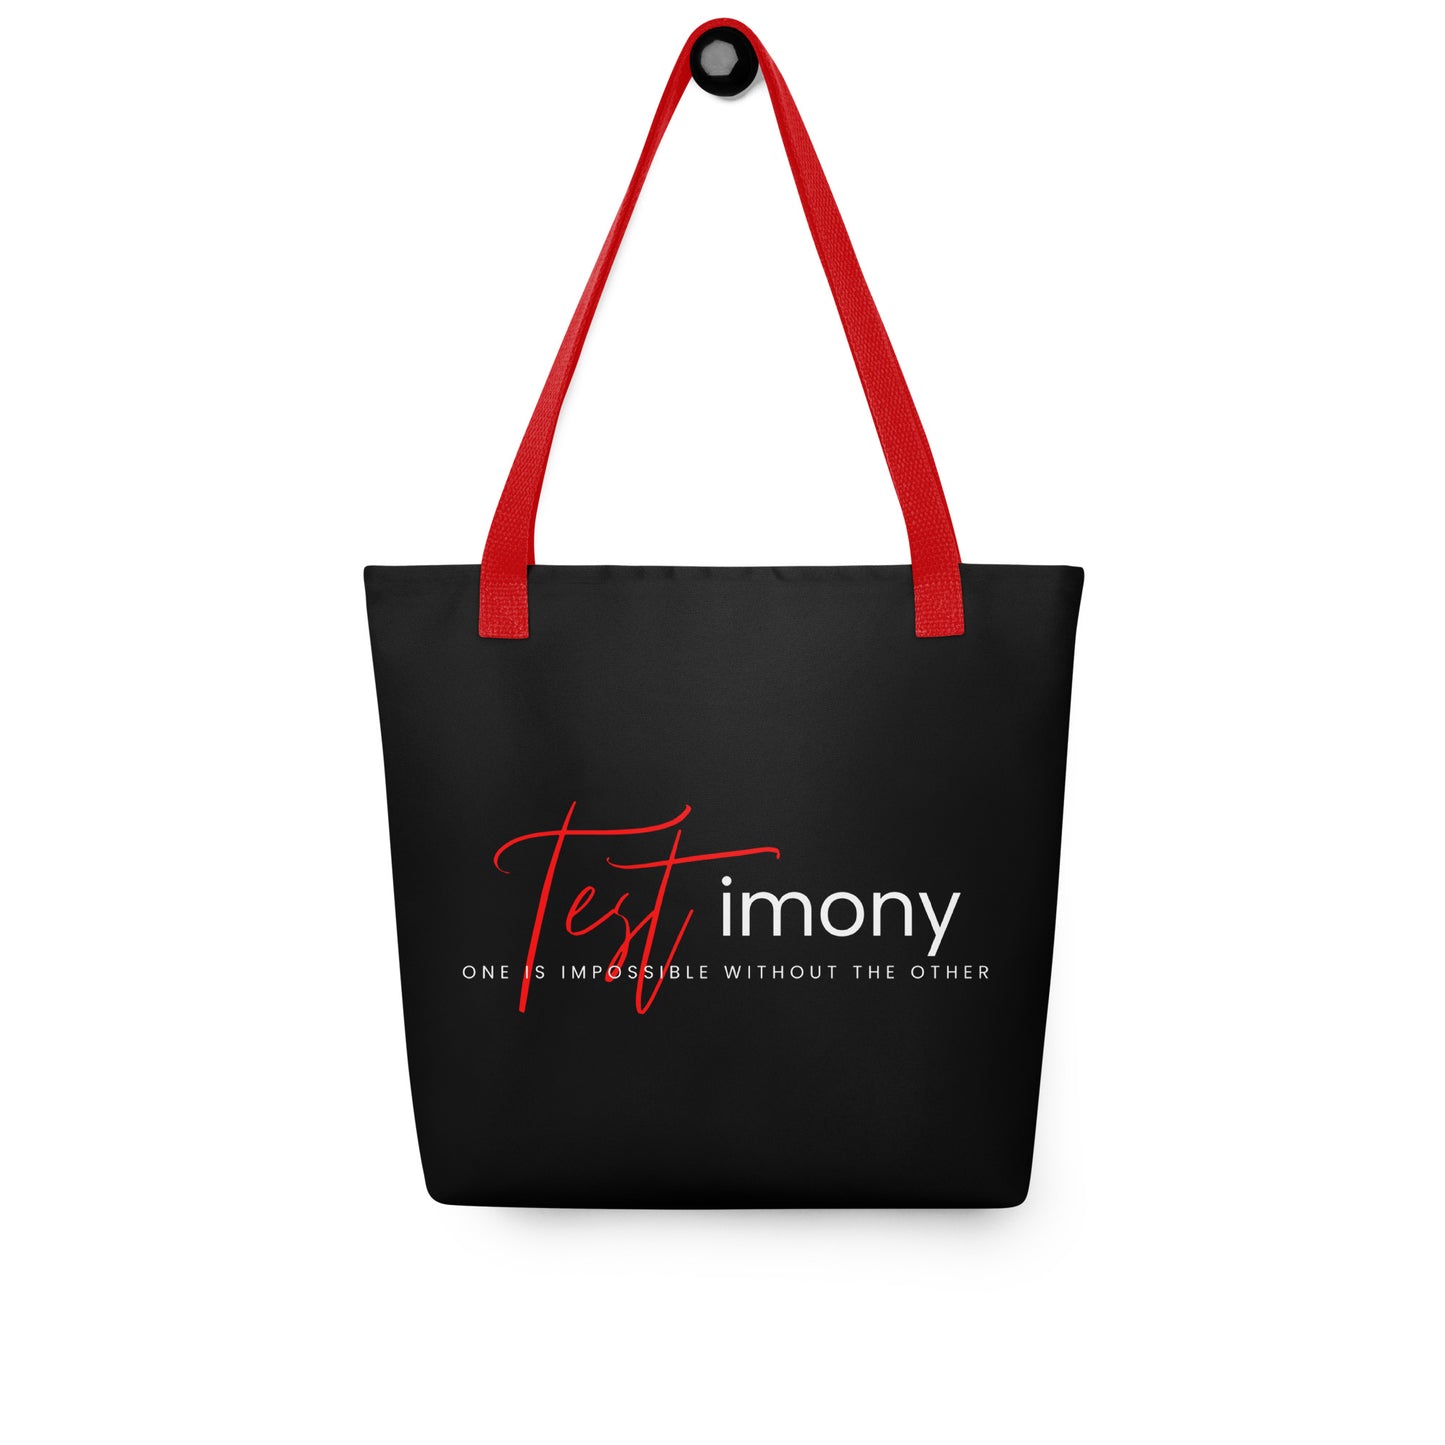 TESTimony "One is Impossible Without the Other" Tote bag